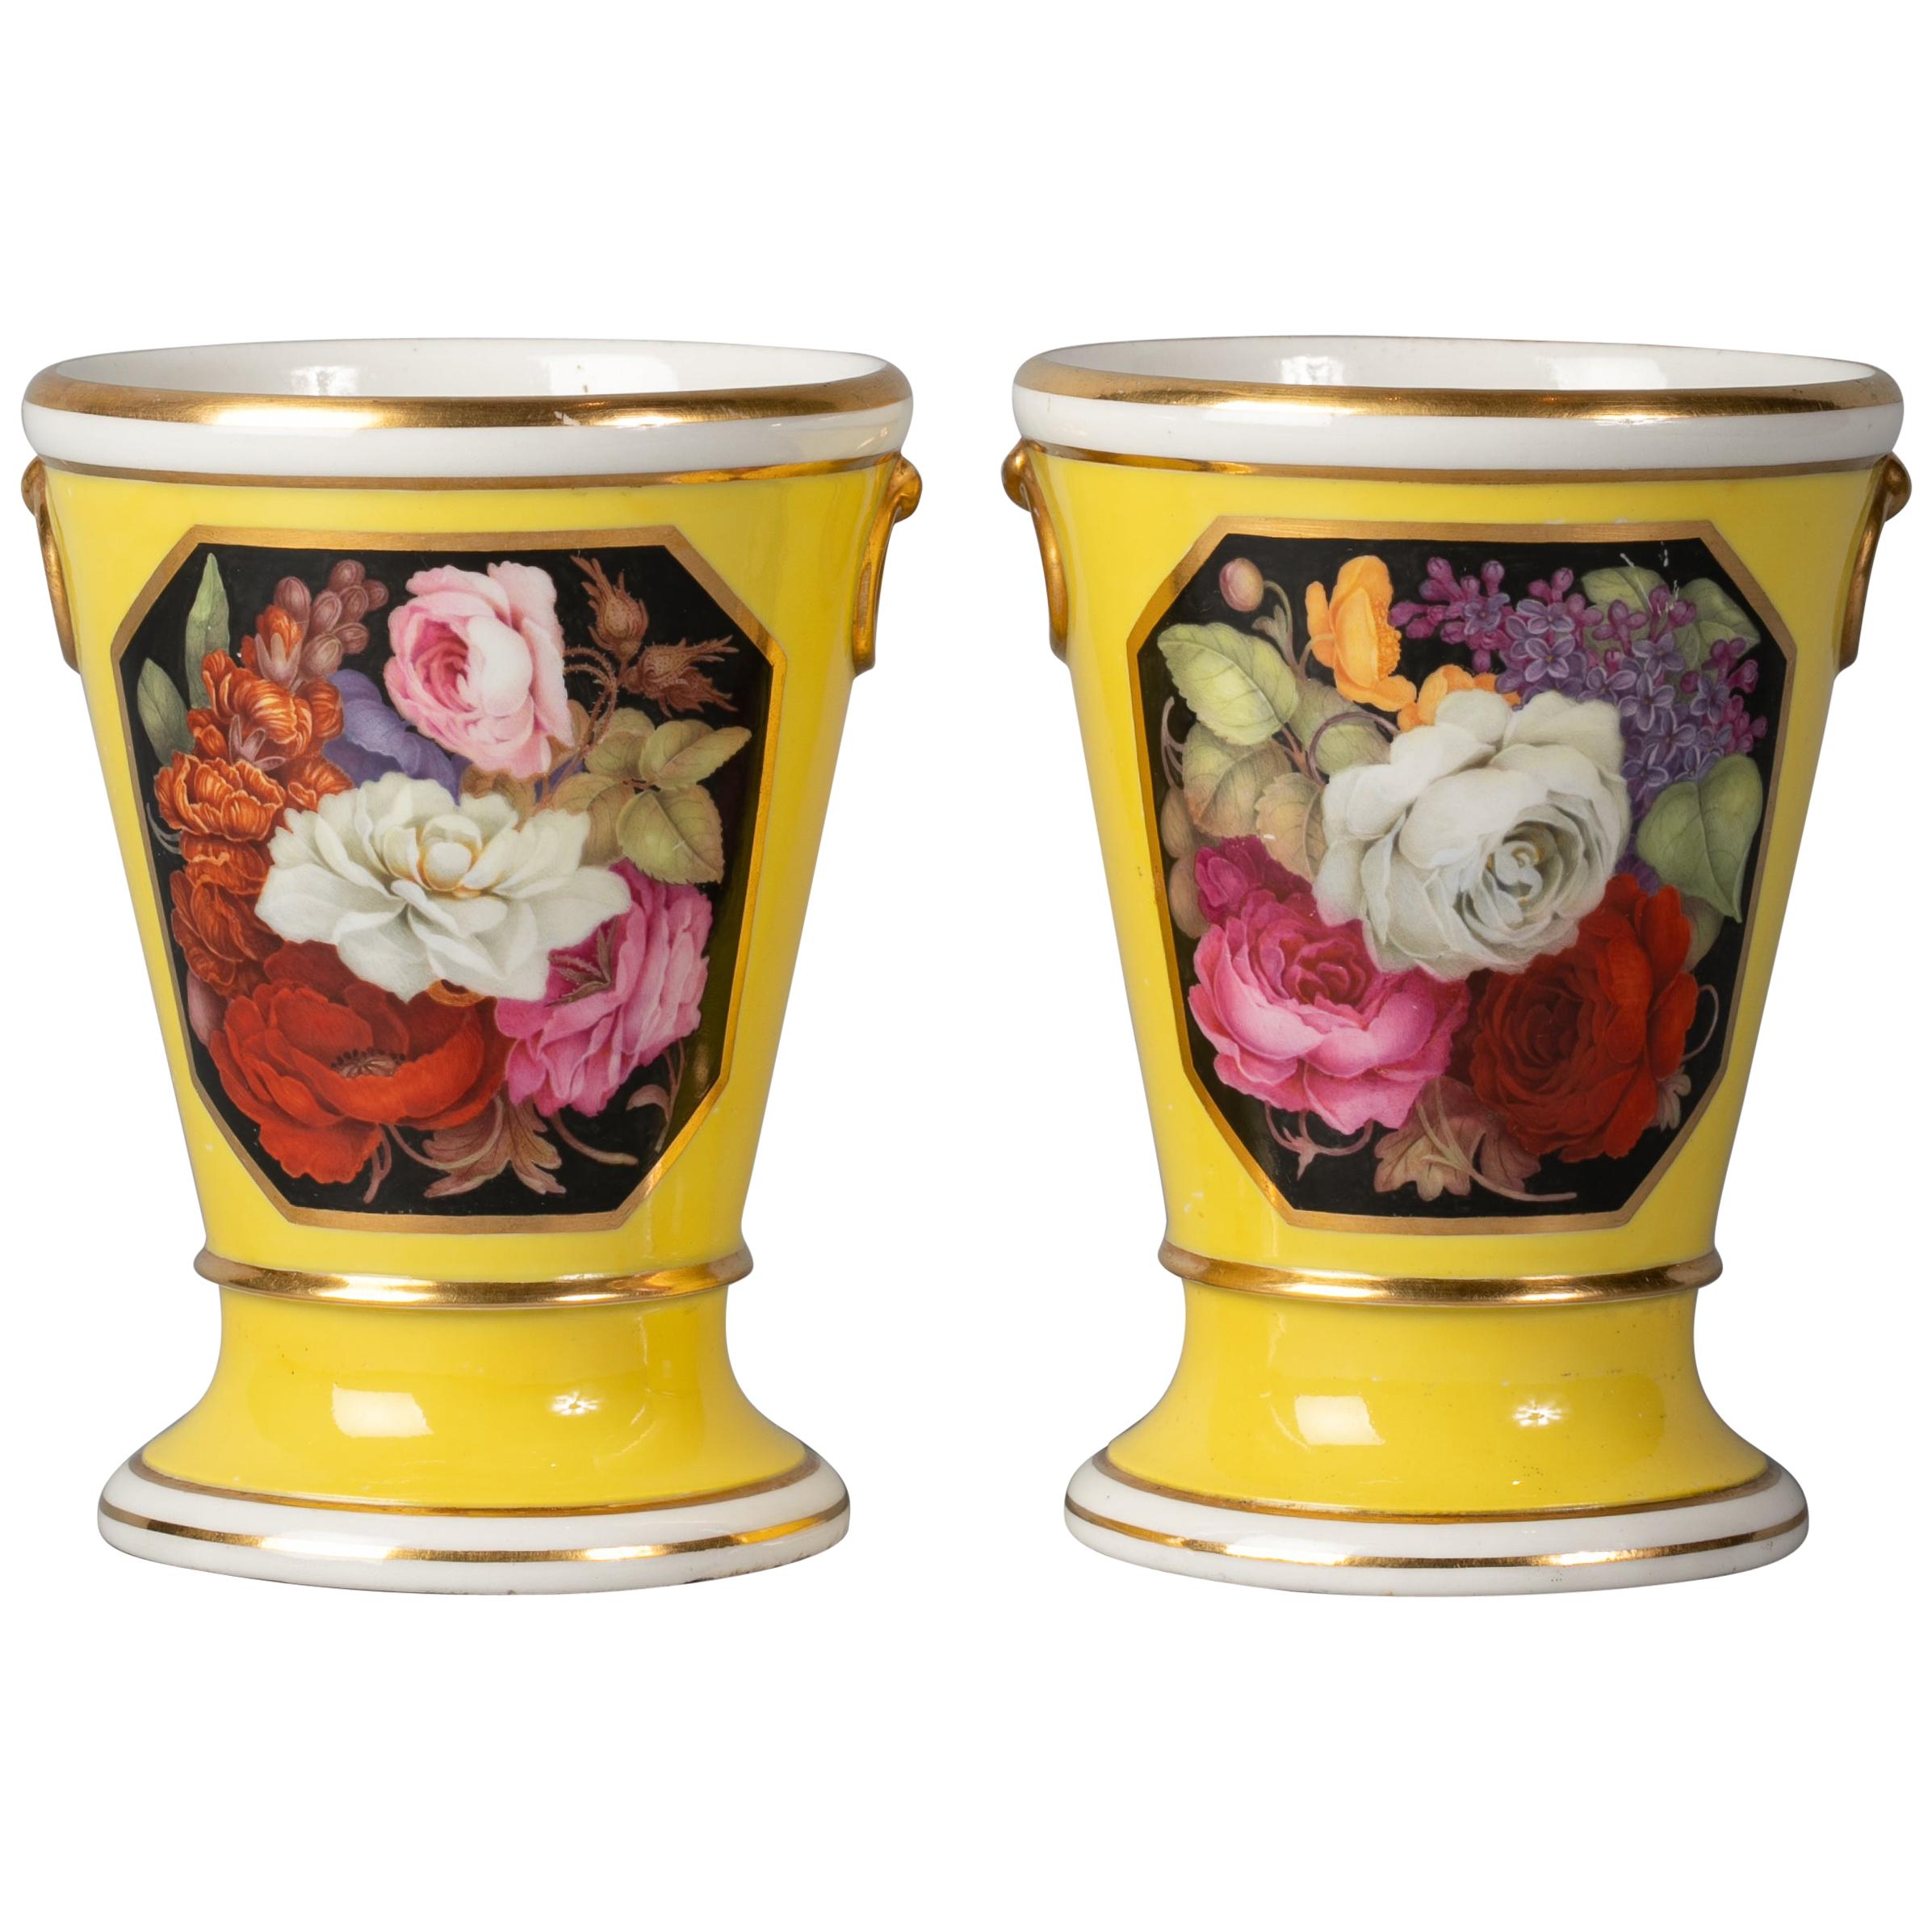 Pair of English Porcelain Yellow-Ground Cachepots, Flight & Barr, ca 1800